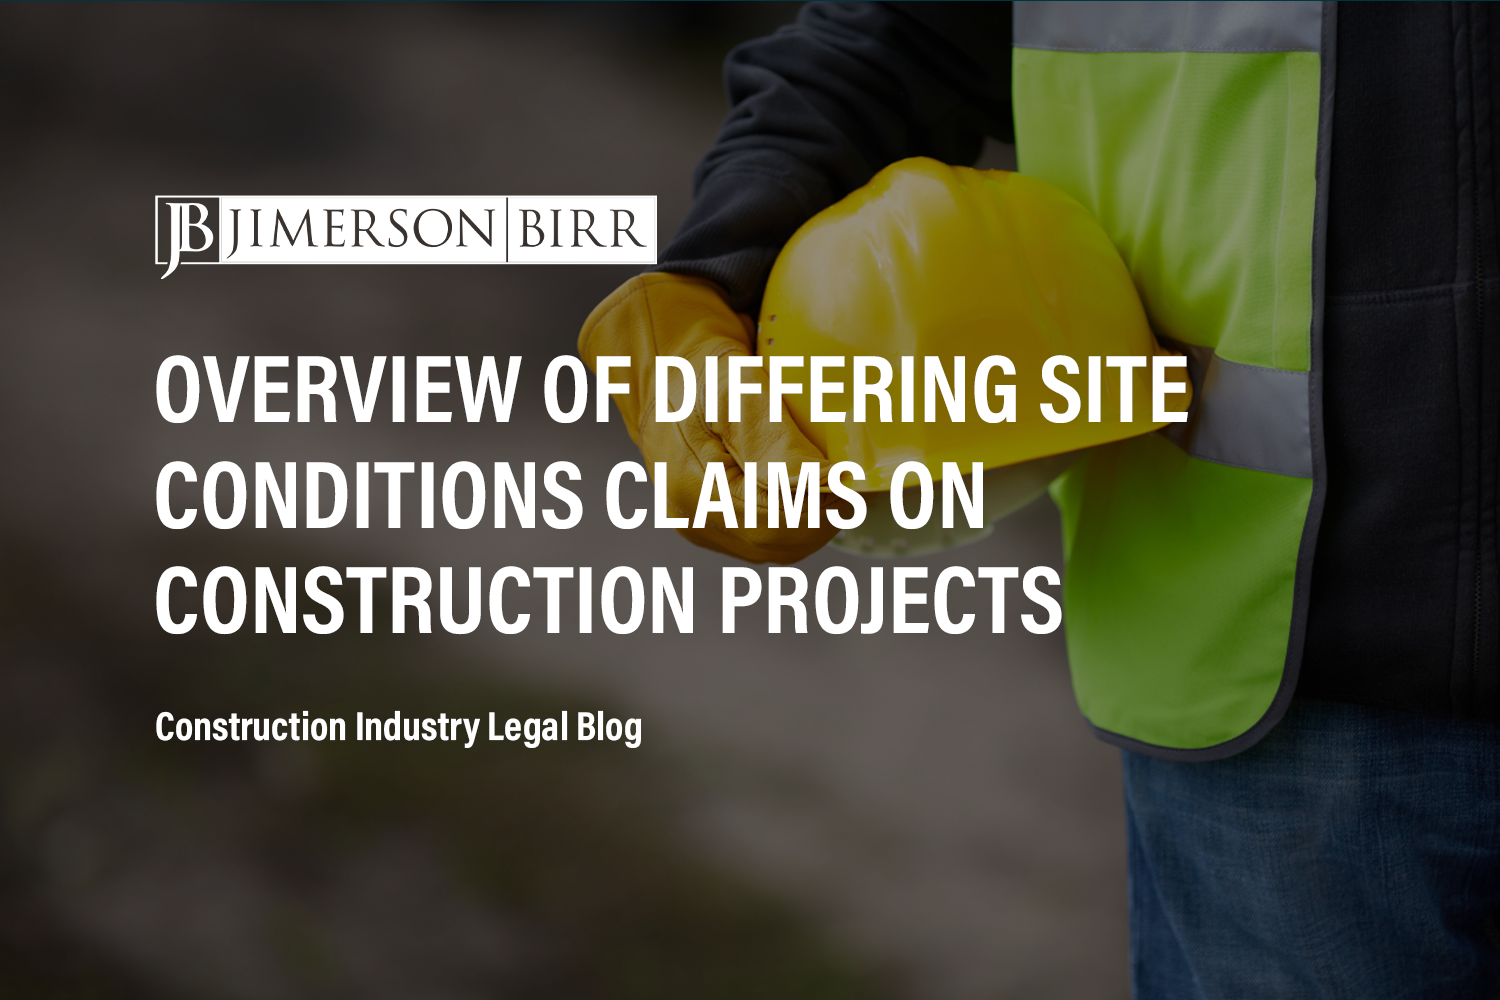 Overview of Differing Site Conditions Claims on Construction Projects